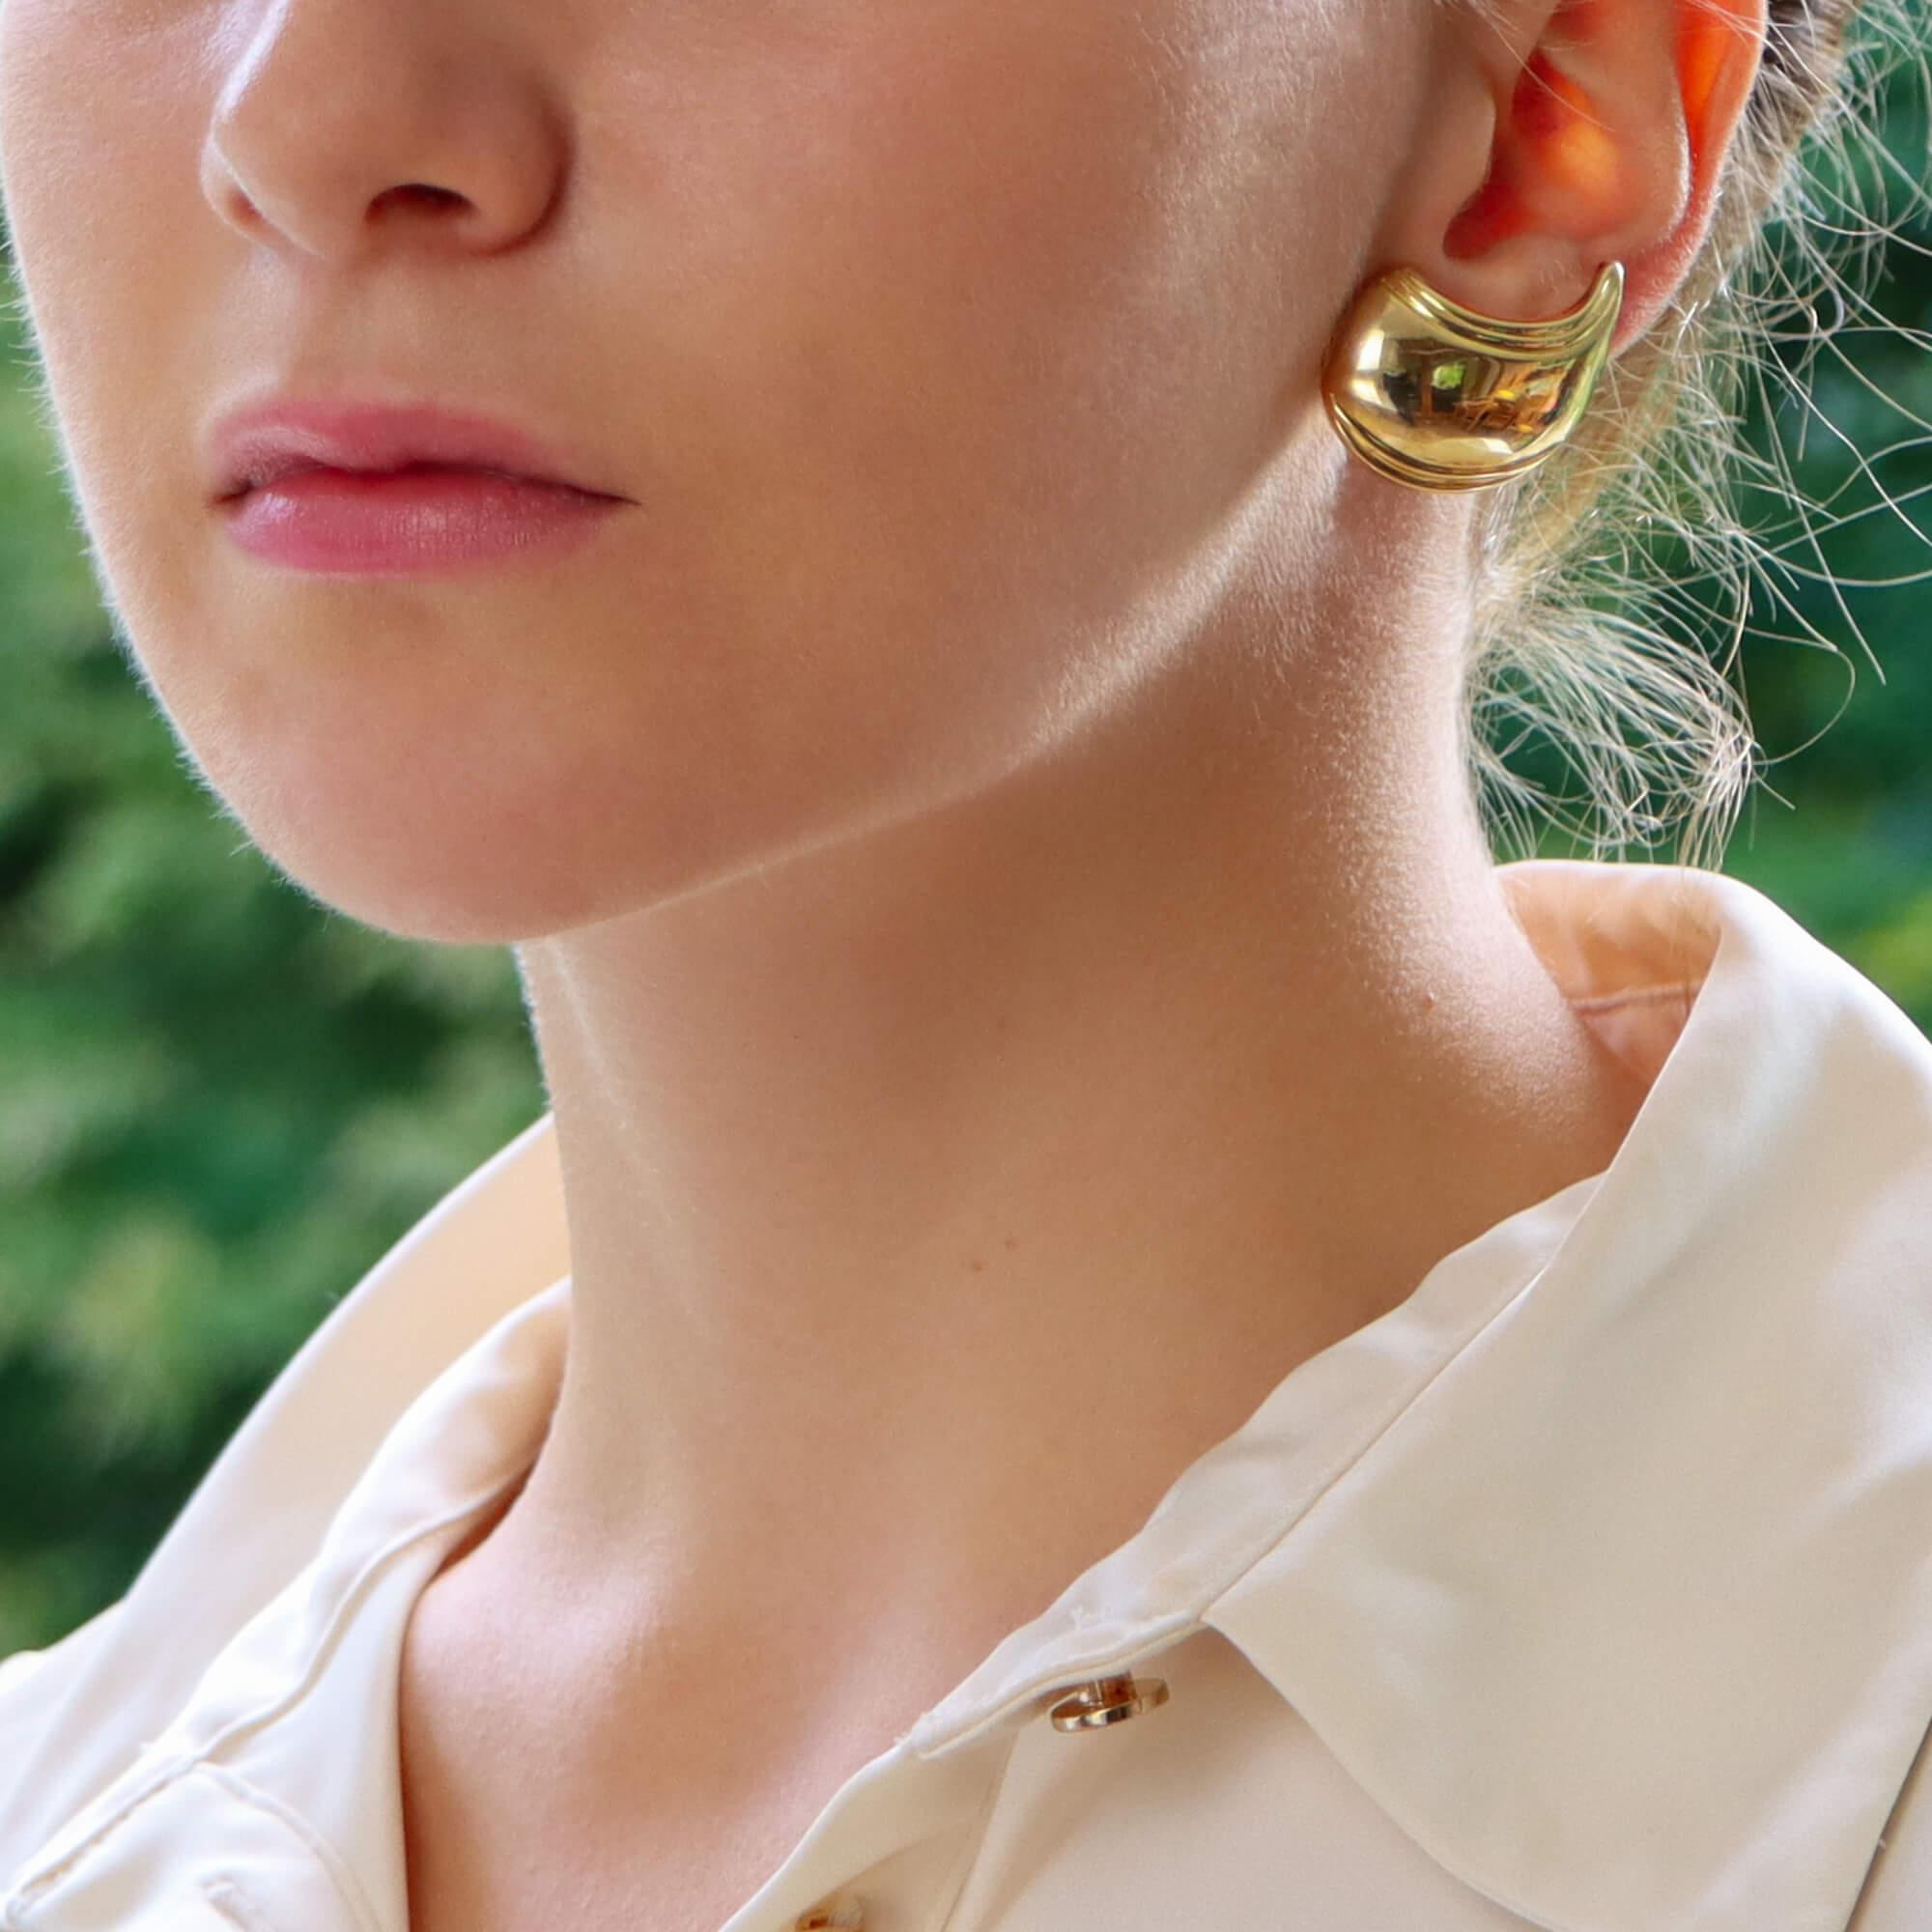 A stylish pair of vintage 1980’s curved gold earrings set in 18k yellow gold.

Each earring is composed of a ridged curved panel; designed to travel up the wearers ear. The earrings are iconic of the 1980’s and due to the size stand out beautifully